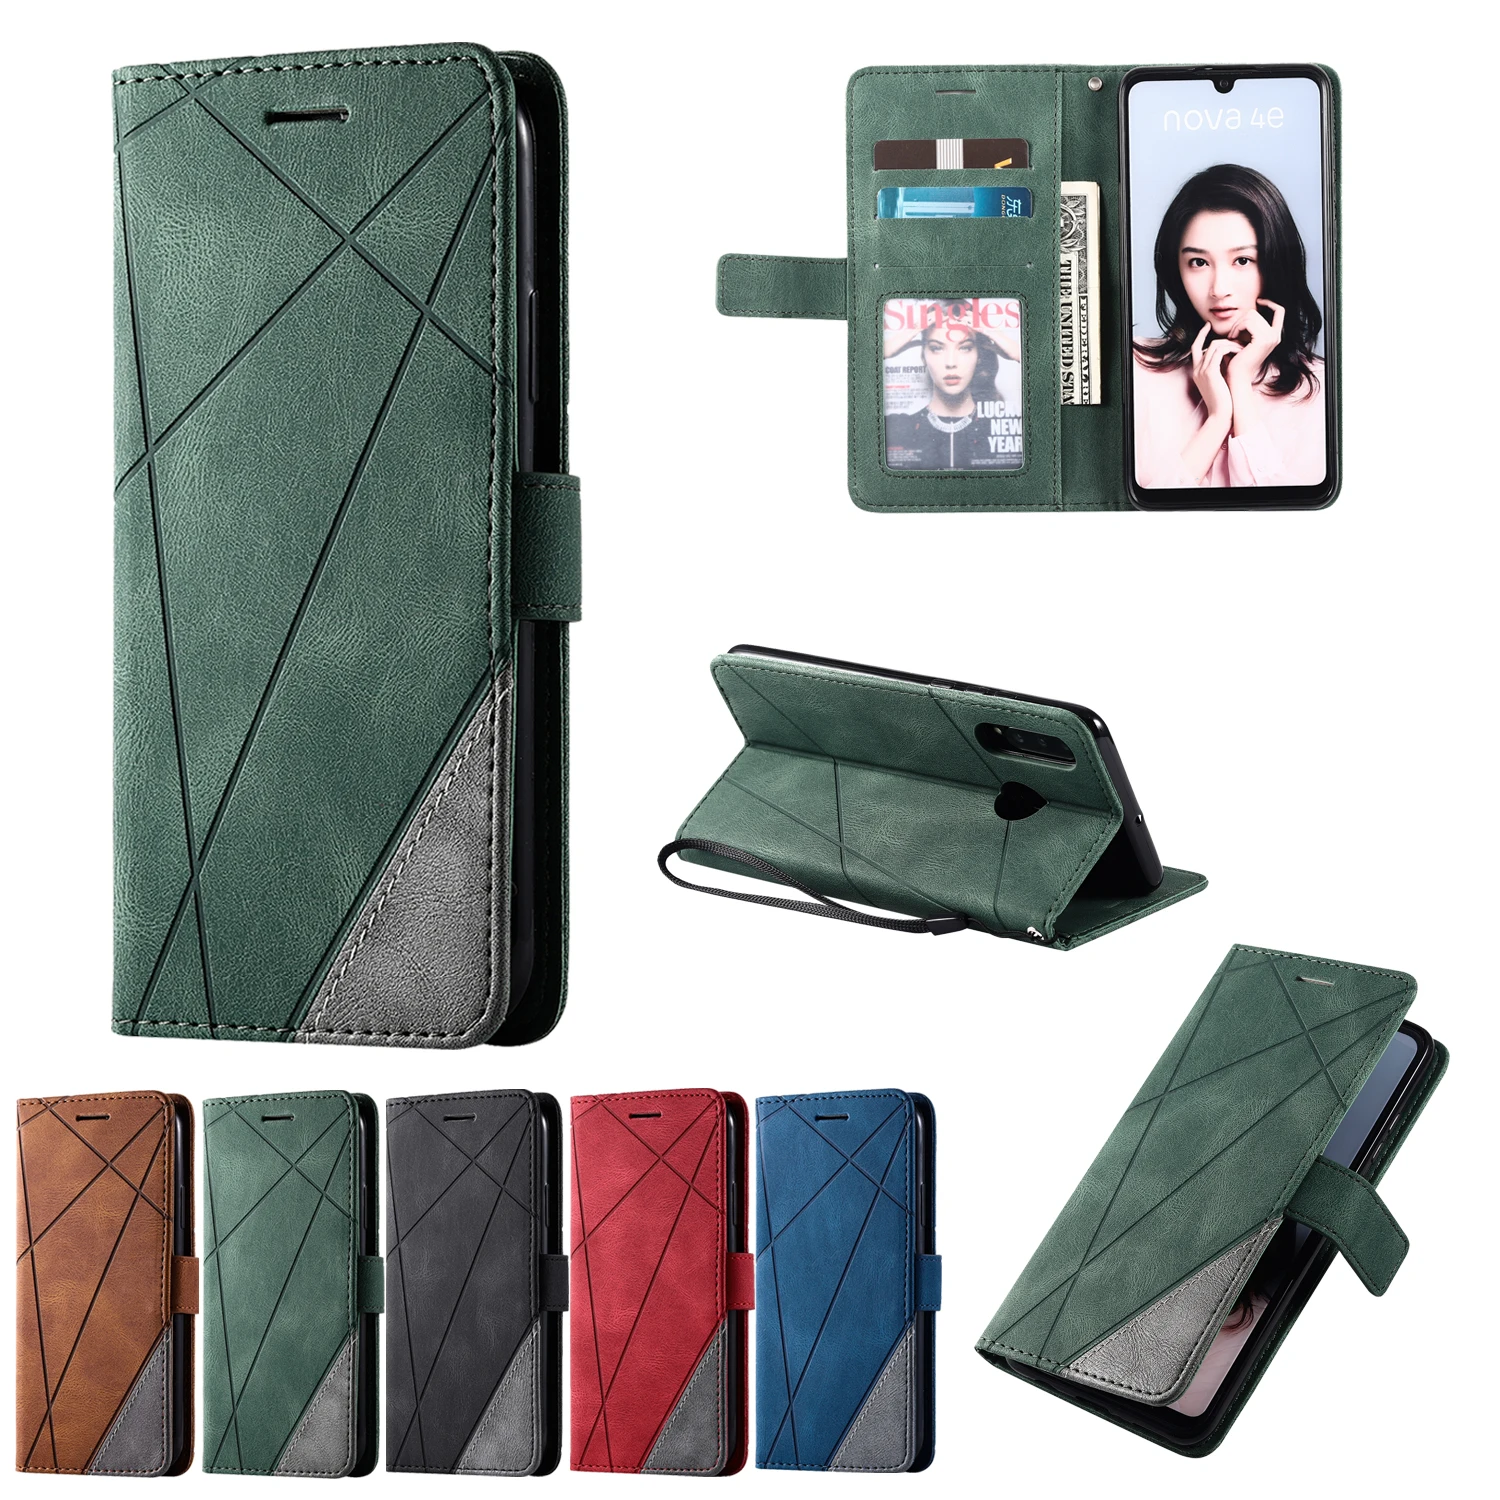 

Leather Case For OPPO Realme 8i X7 Pro 8 Pro C11 C20 V11 C1 2 7i C12 C15 C25 S C11 C17 7 6 5 Narzo 10 20A 30A 20 Pro Phone Cover